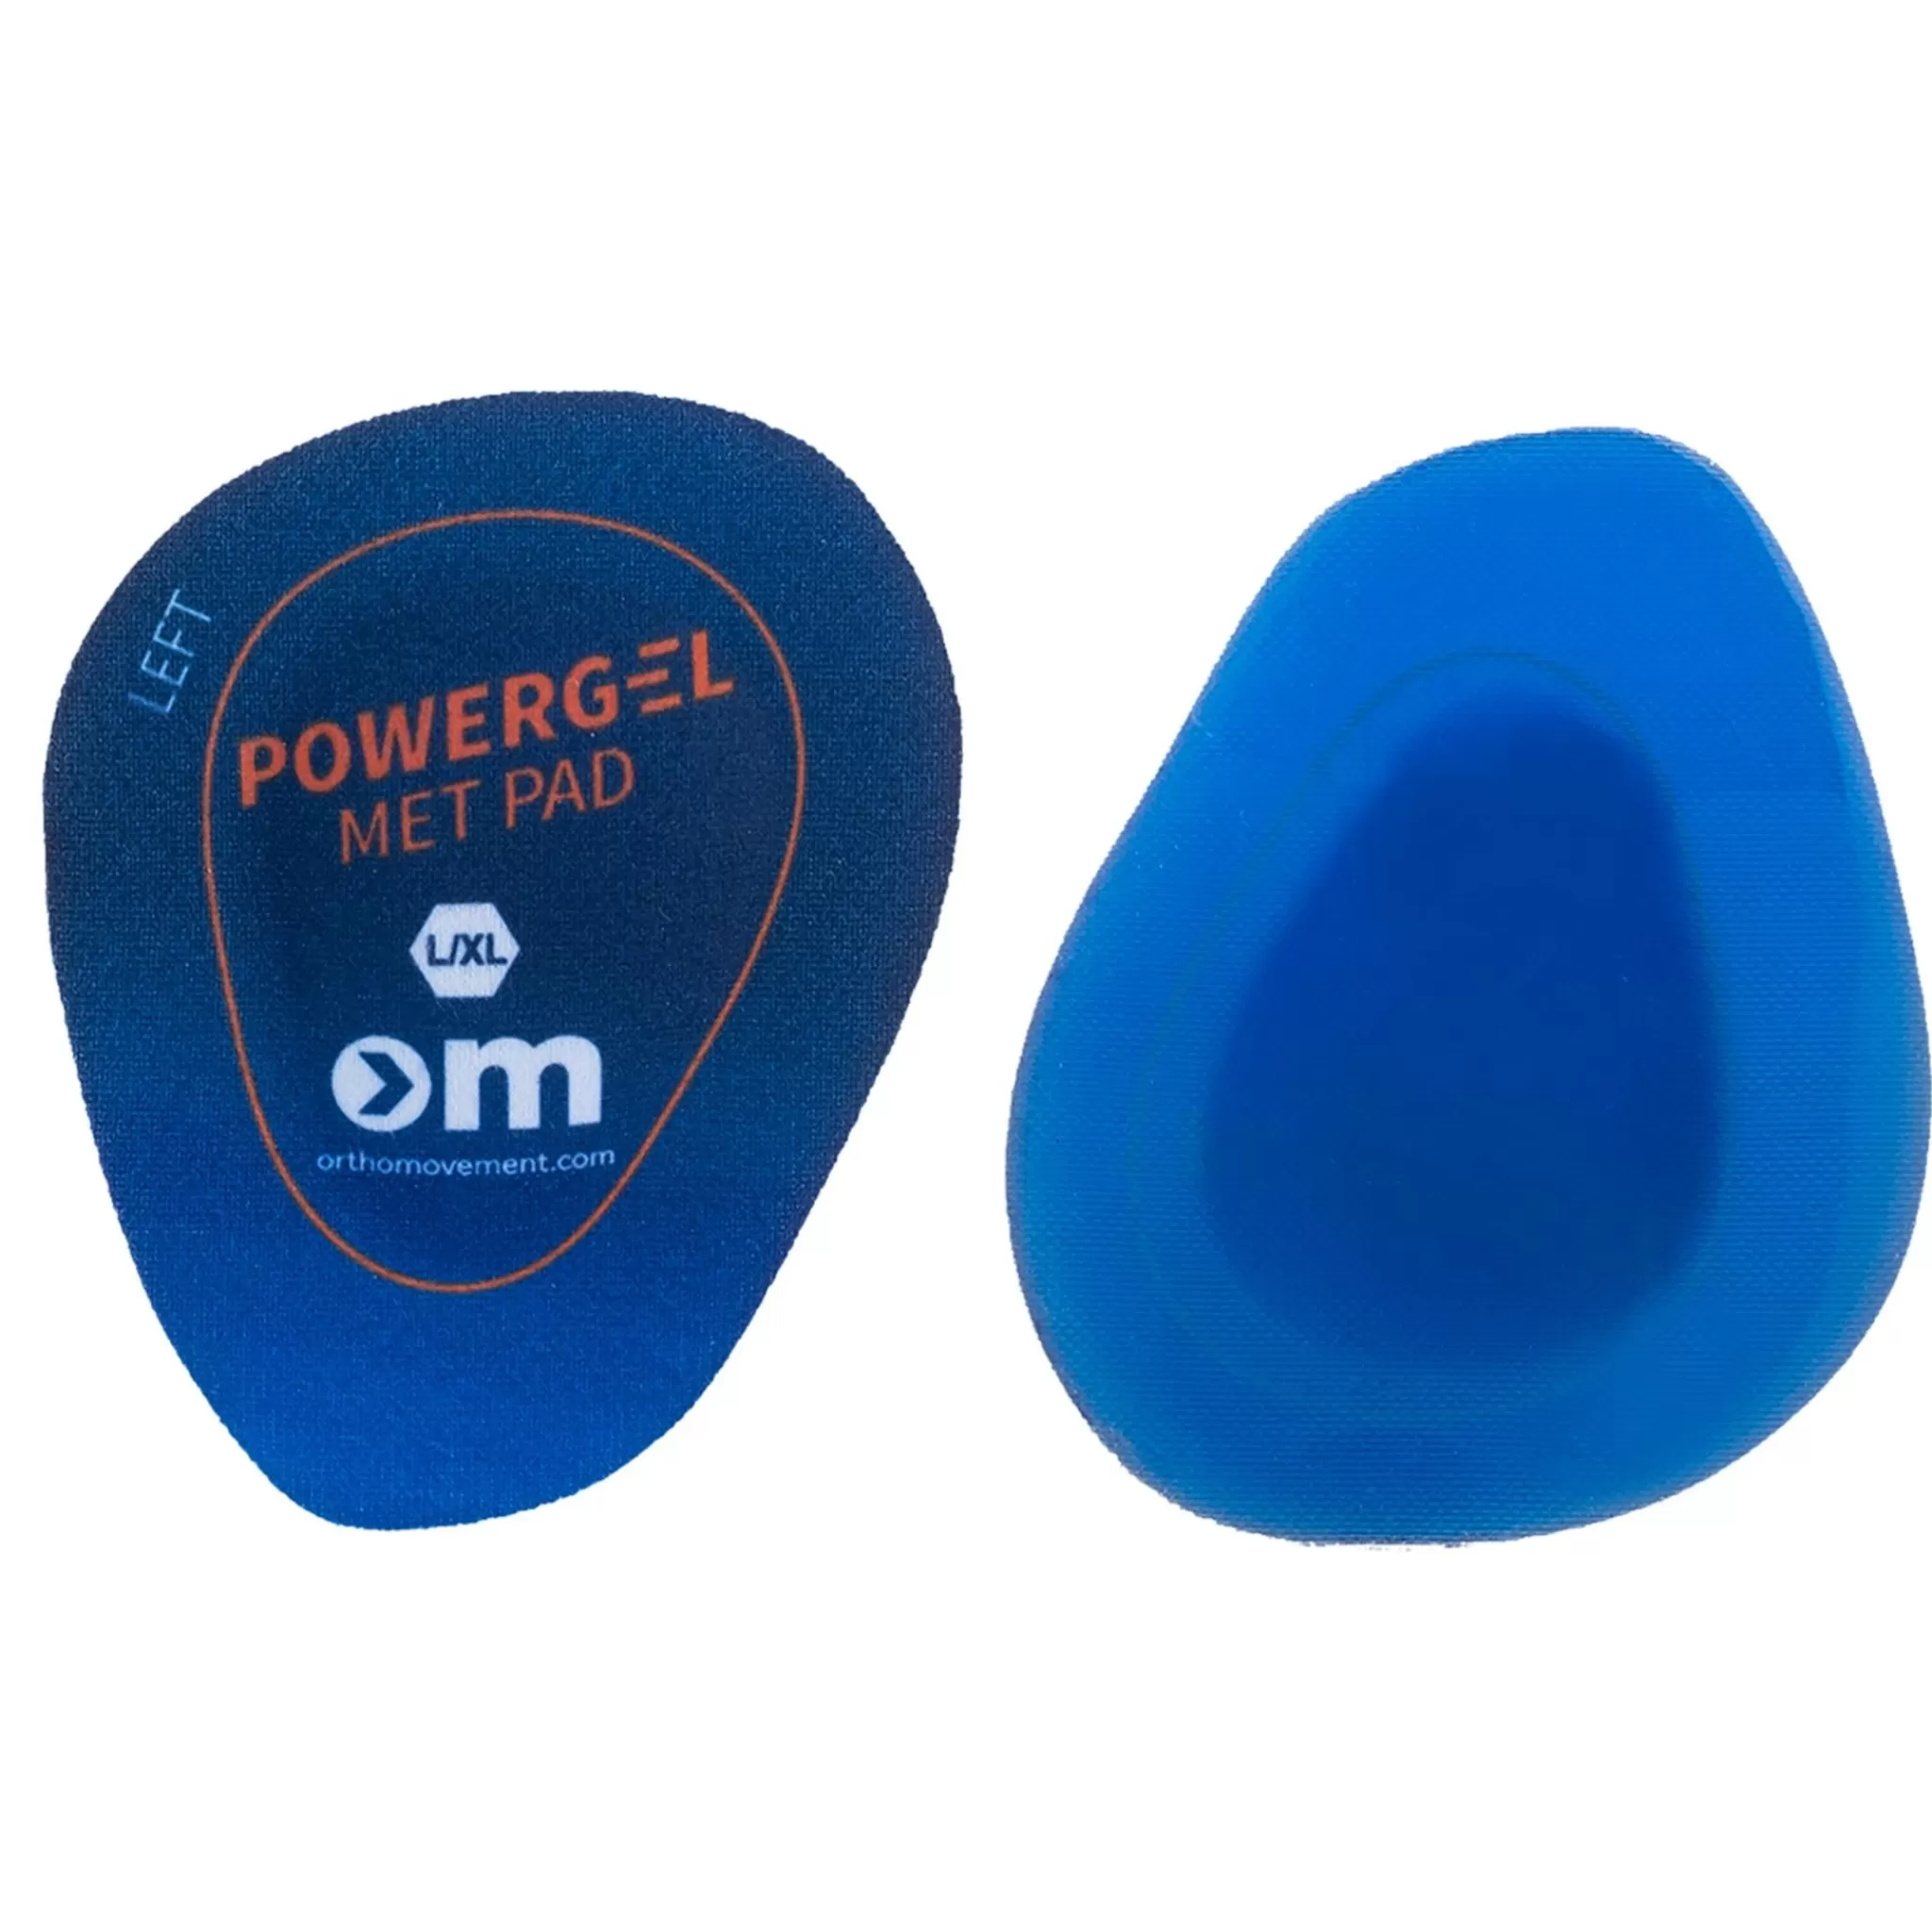 Cheap Ortho Movement Om Met Pad - One Color, Powergel Forfotpute